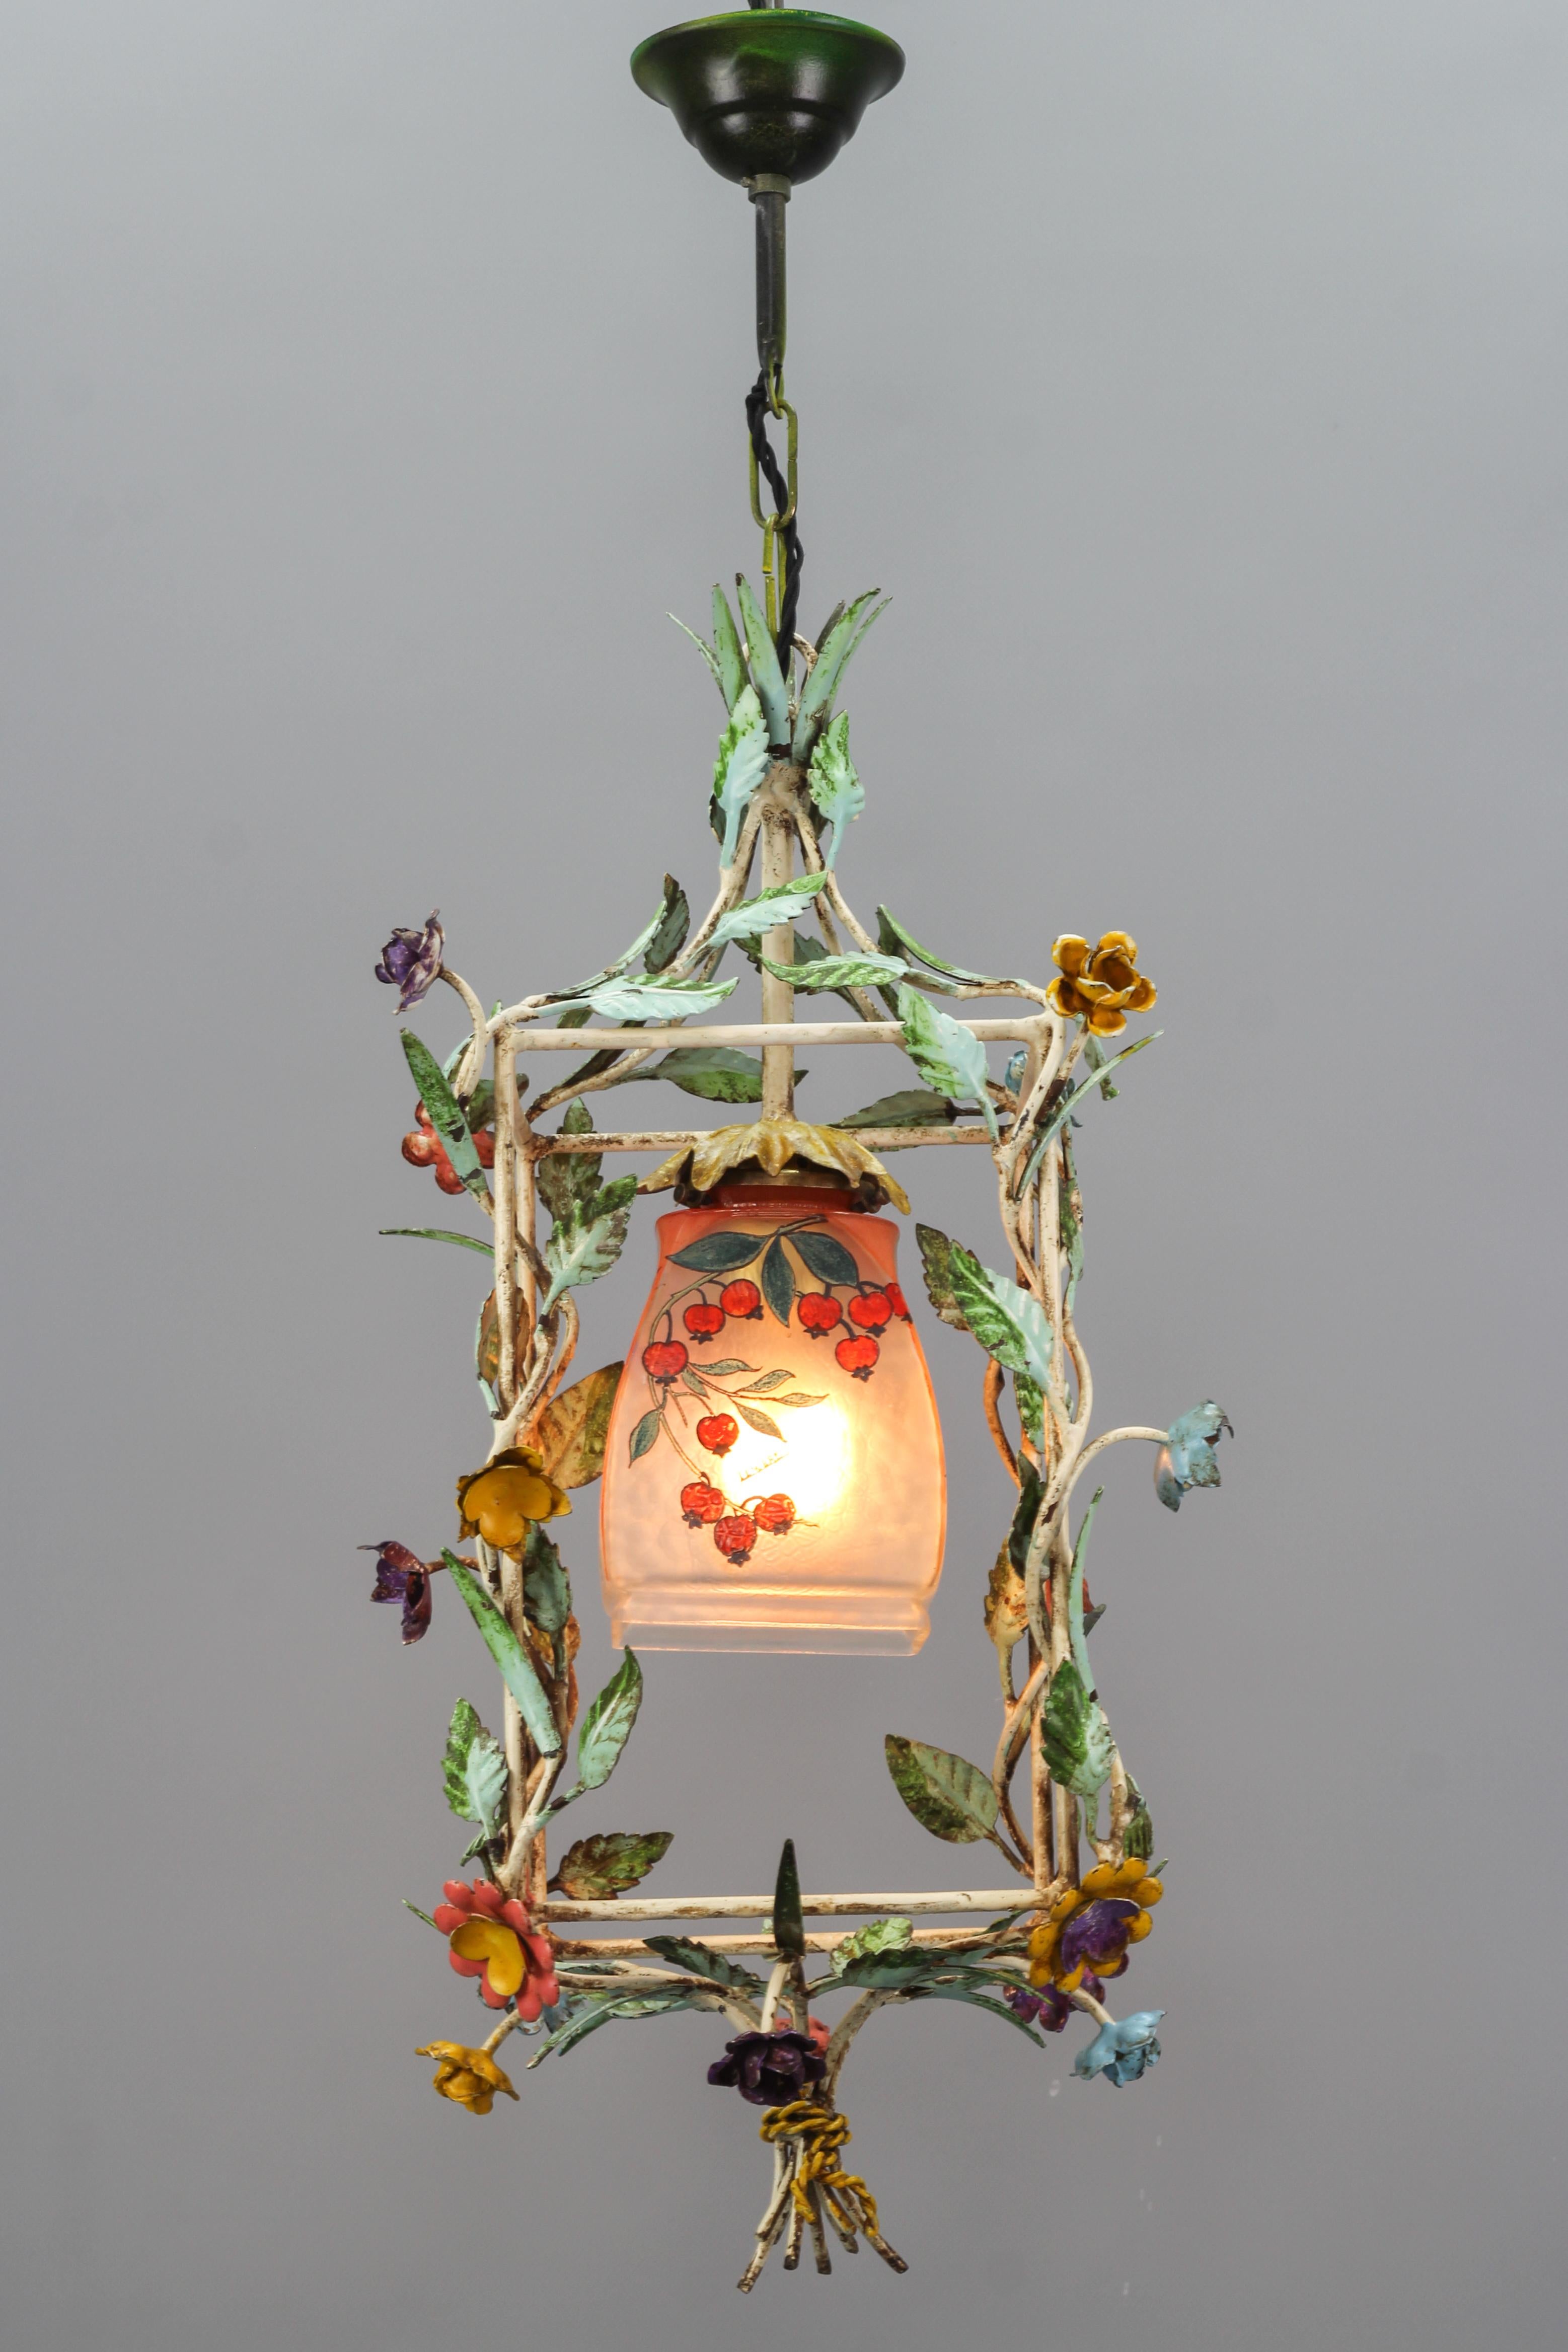 French Provincial French Tole and Glass Polychrome Pastel Flower Cage Pendant Light, 1950s For Sale